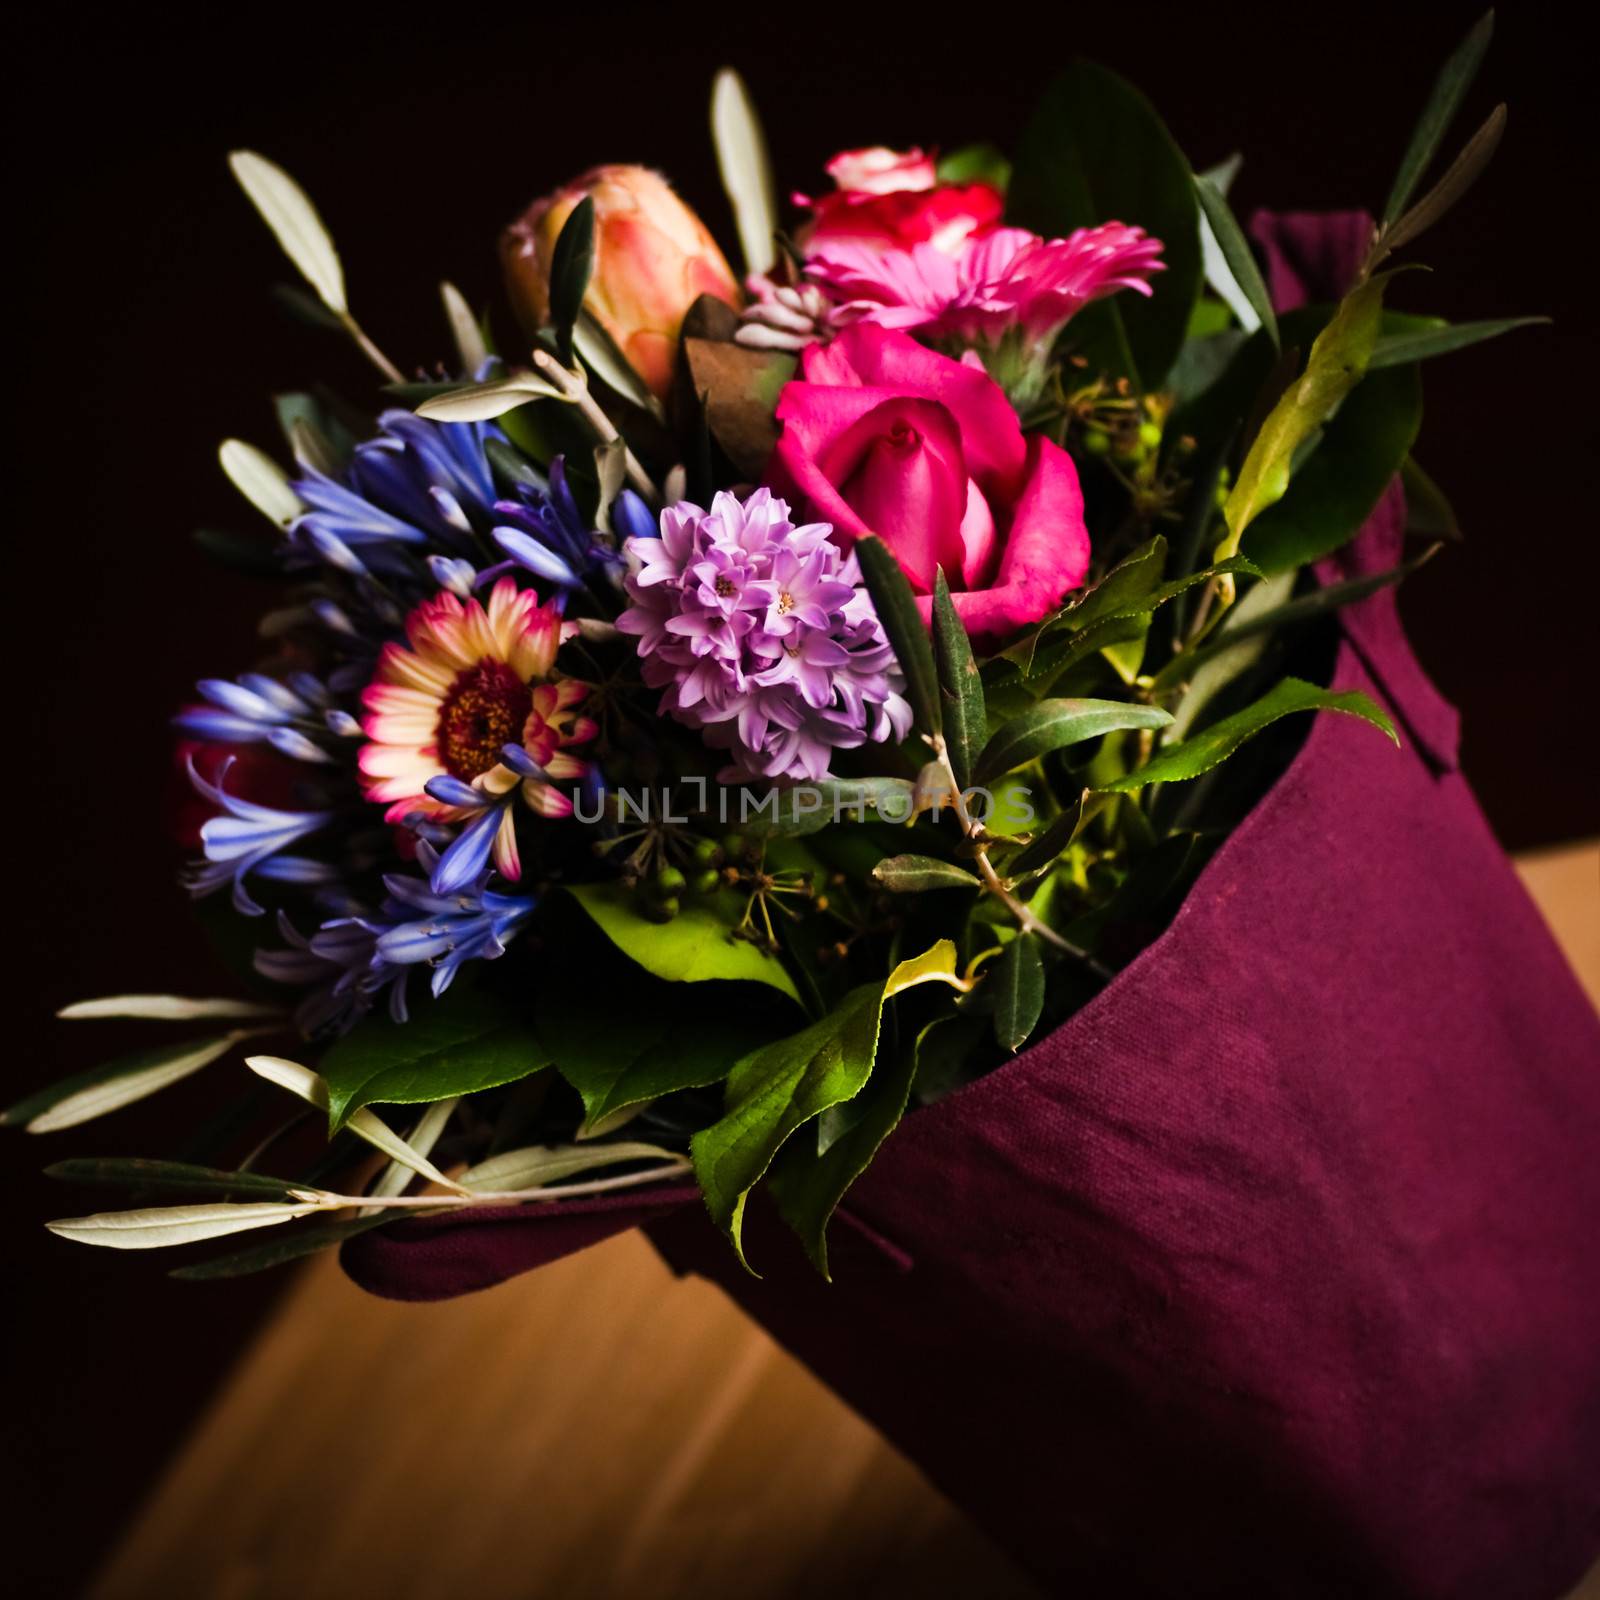 Vase like a shopping bag filled with spring flowers and with dark background - square image